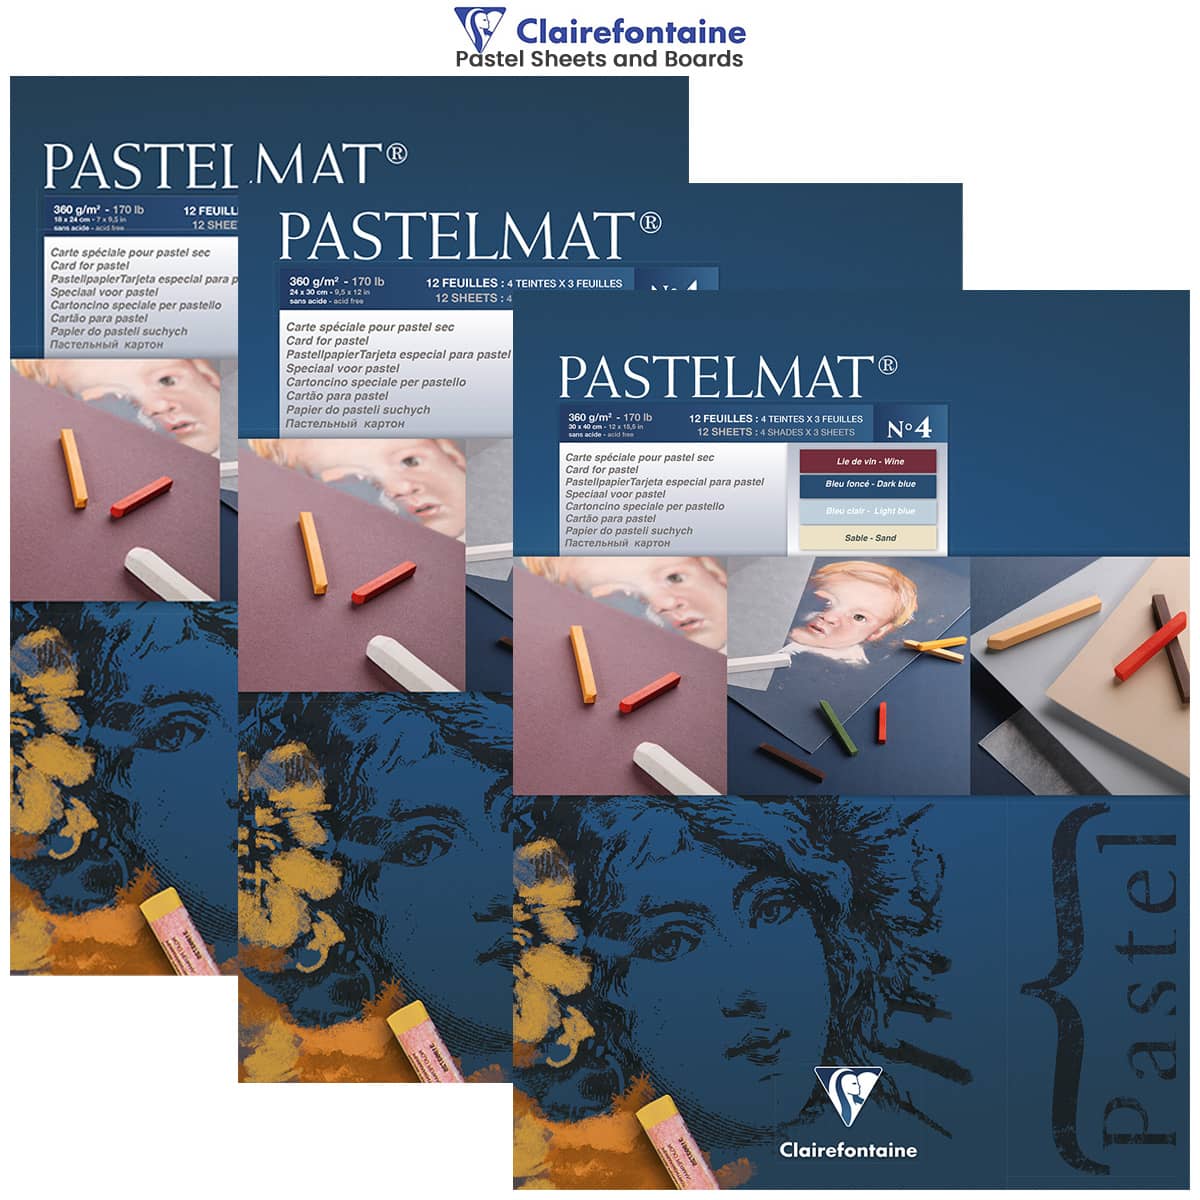 Clairefontaine Pastelmat Papers – Jerrys Artist Outlet